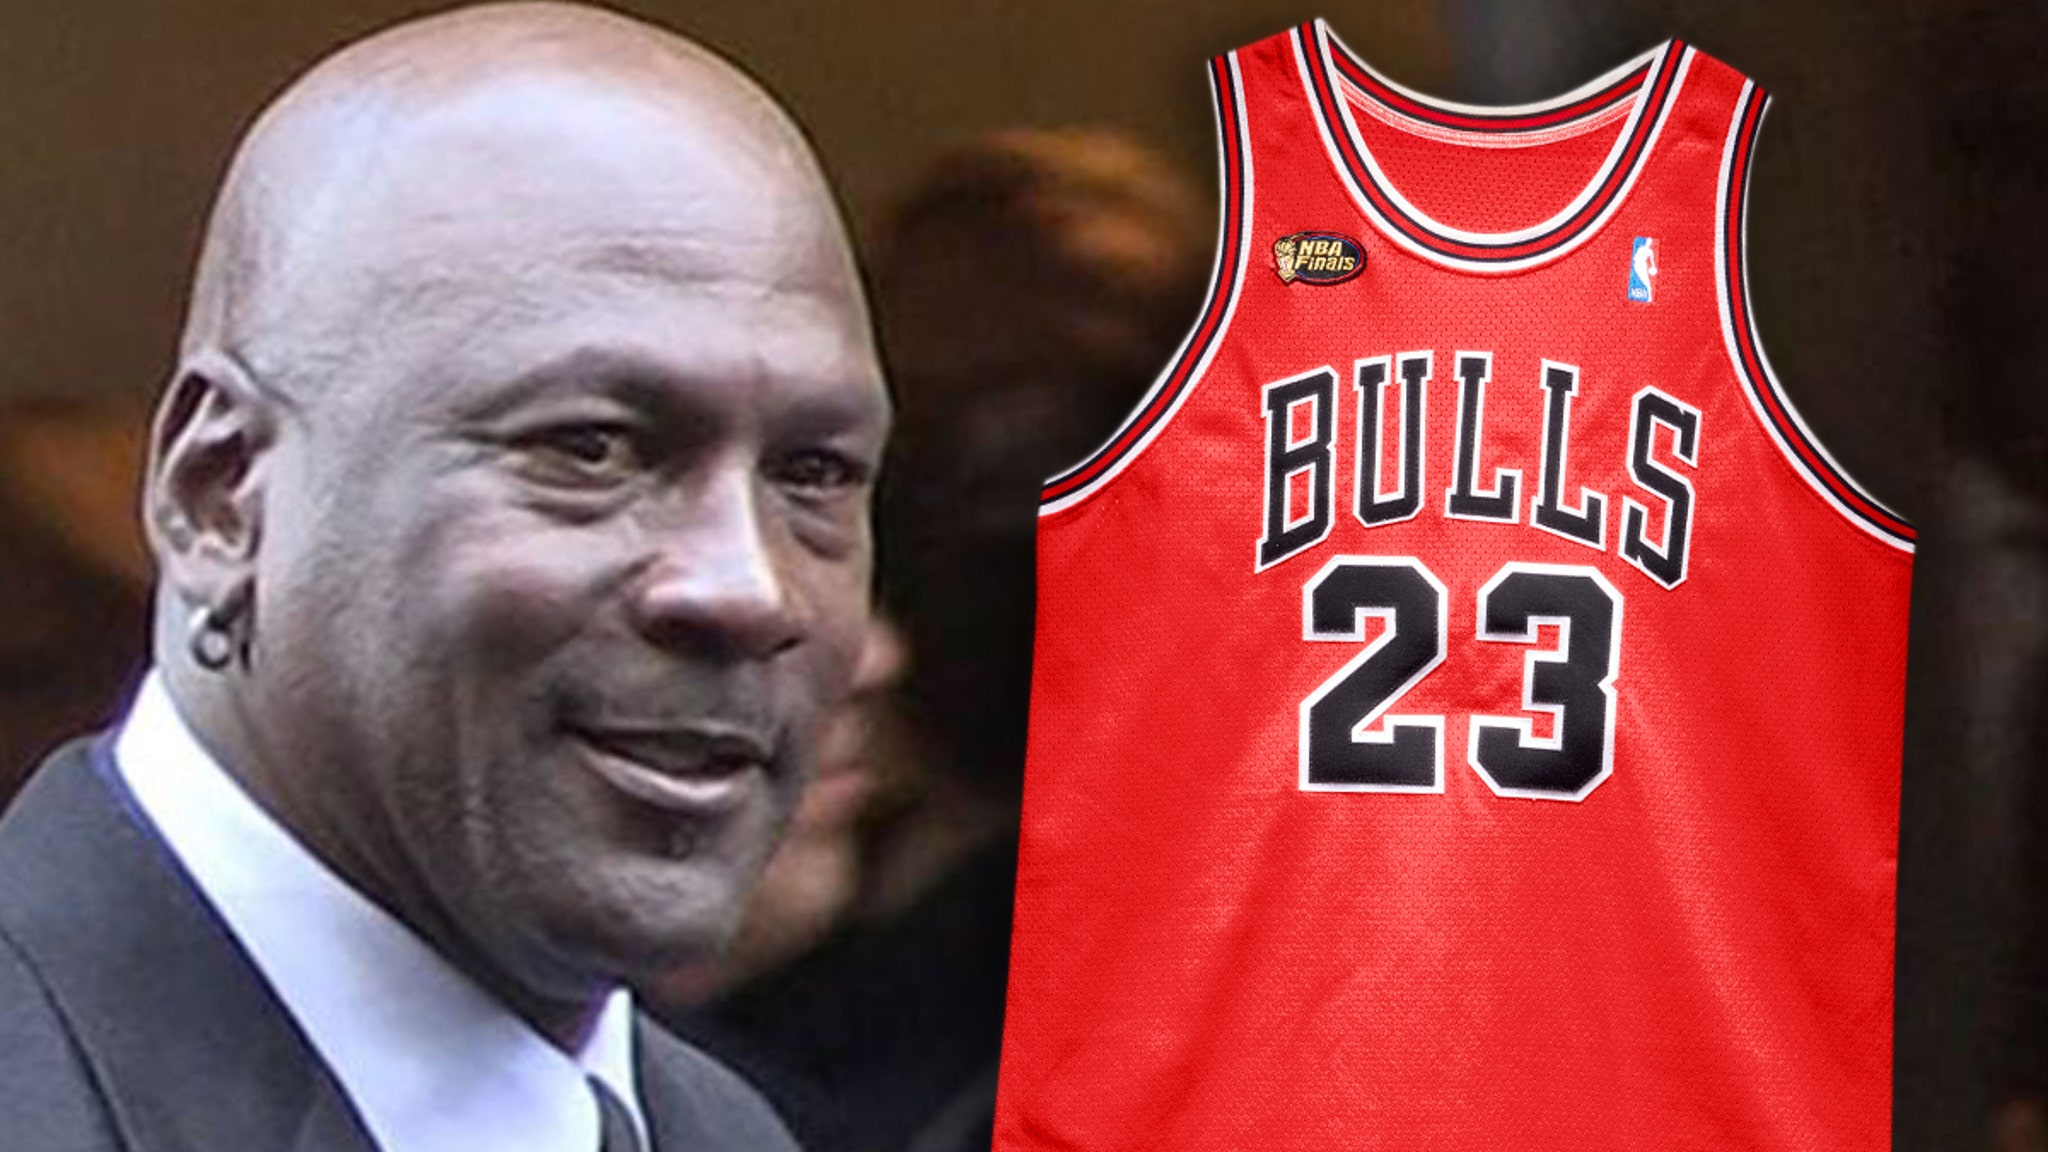 Jordan Jersey Being Auctioned For $3-5 Million 